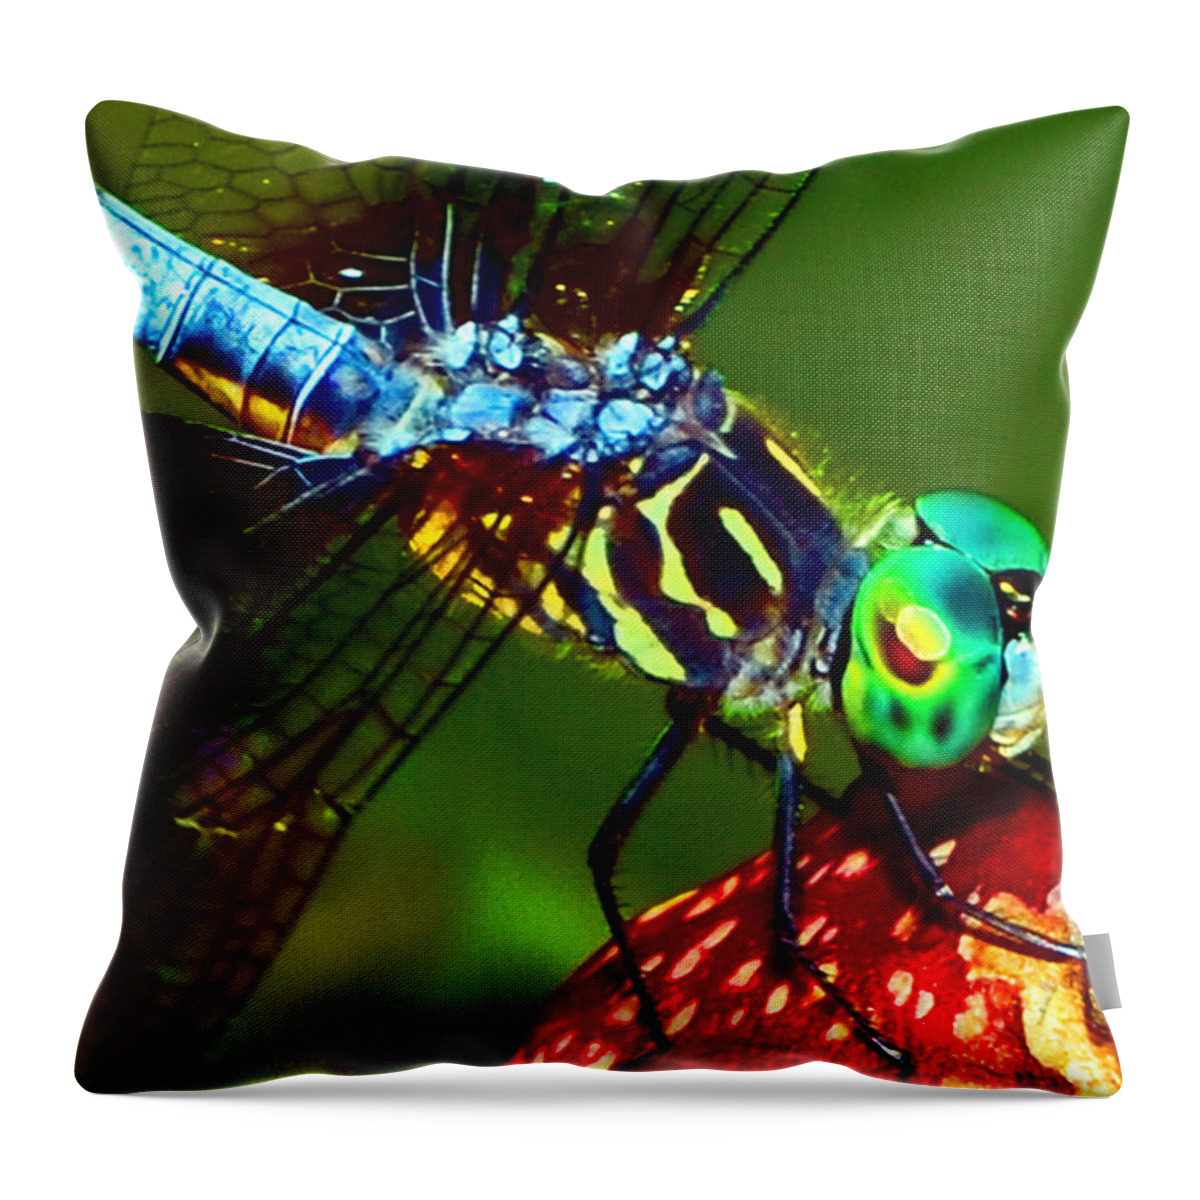 Dragonfly Throw Pillow featuring the photograph Dragonfly On A Pitcher Plant 007 by George Bostian